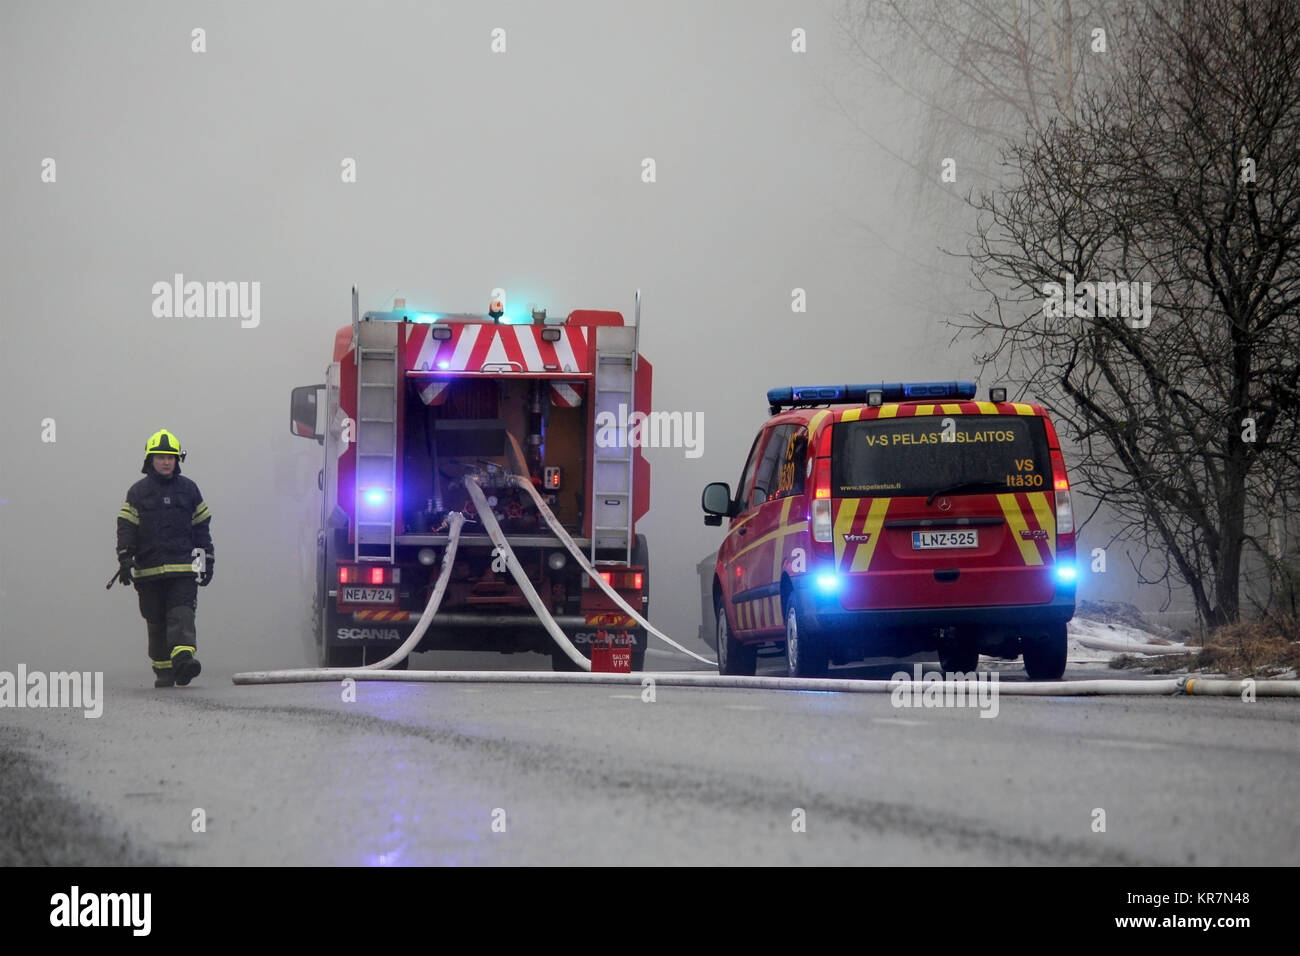 SALO, FINLAND - FEBRUARY 16, 2014: Firefighter emerges from heavy smoke at the fire scene of Salo Cement Plant, with two fire trucks on the street. Stock Photo